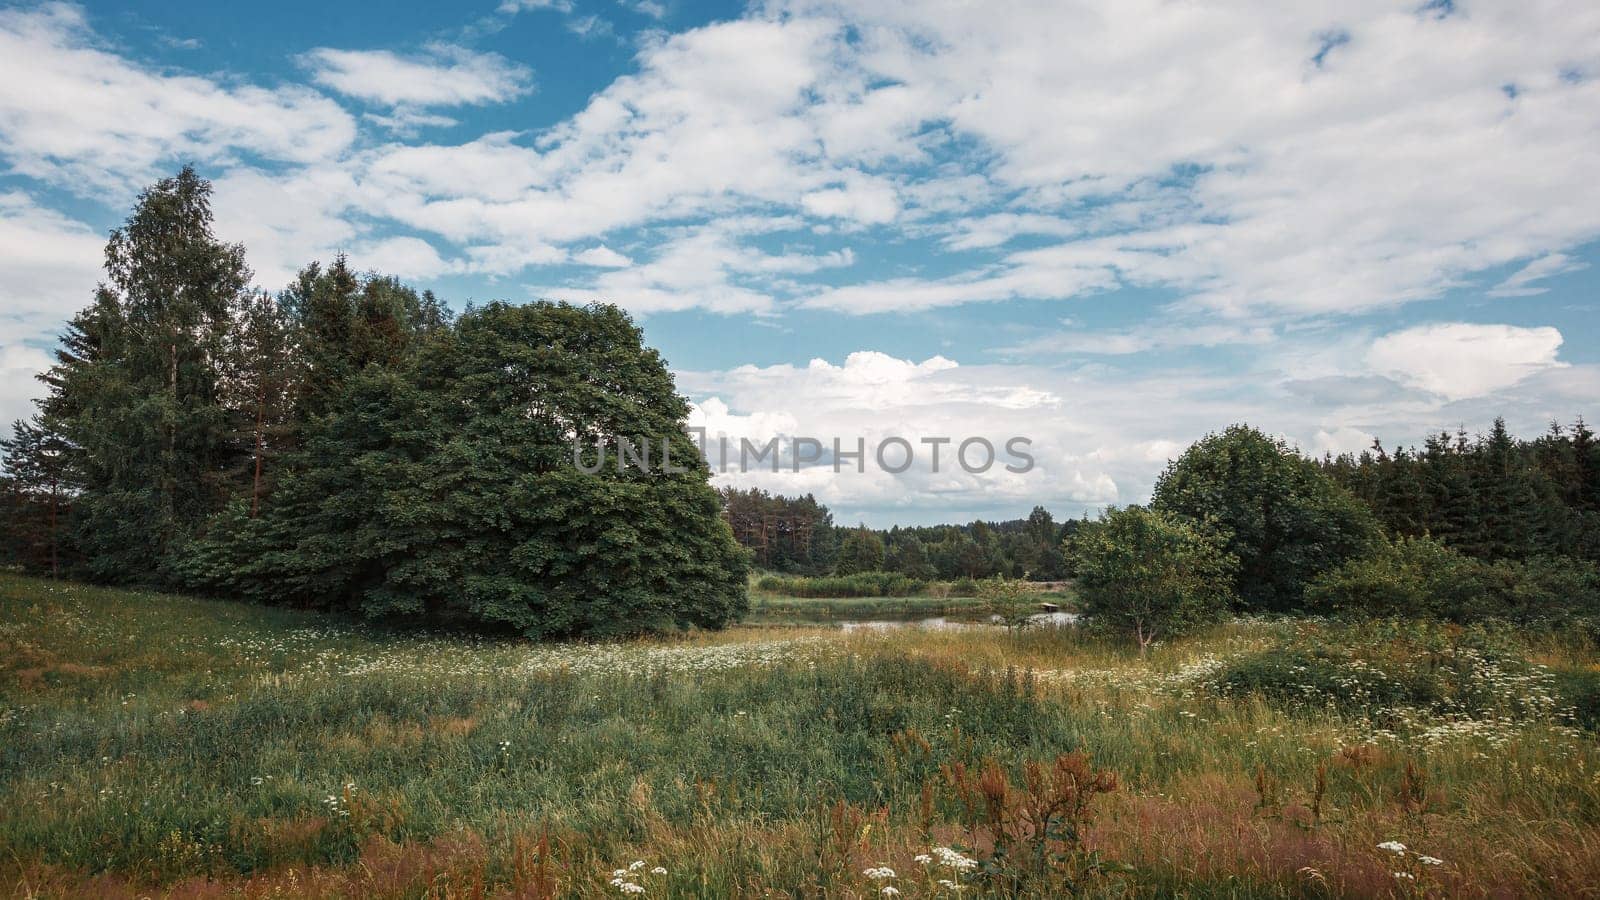 Wonderful landscape of a summer sunny day, Lithuanian rural fields by the lake, blue sky with white clouds. by Lincikas